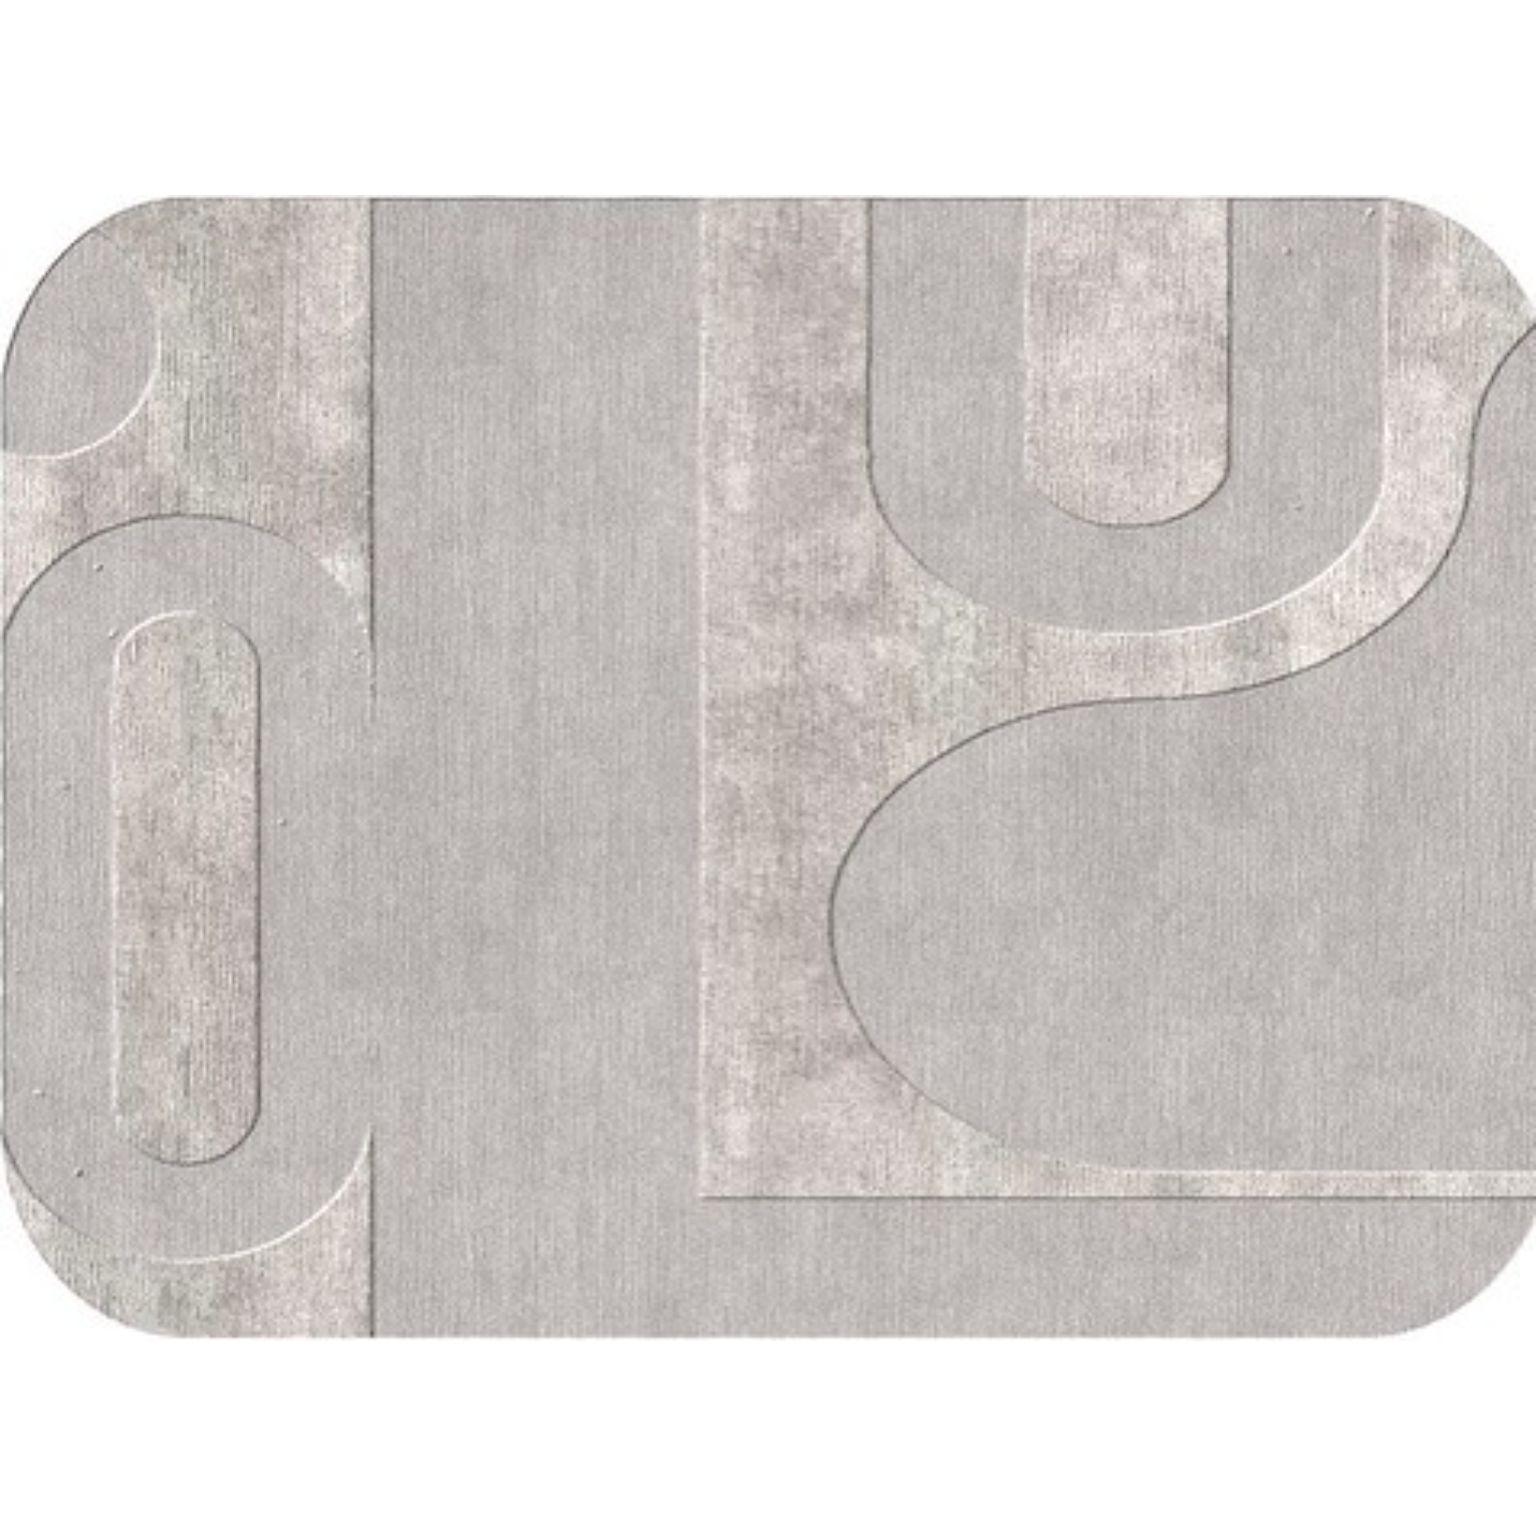 Mod Medium rug by Art & Loom
Dimensions: D274.3 x H365.8 cm
Materials: New Zealand wool & Chinese silk
Quality (Knots per Inch): 80
Also available in different dimensions.

Samantha Gallacher has always had a keen eye for aesthetics, drawing